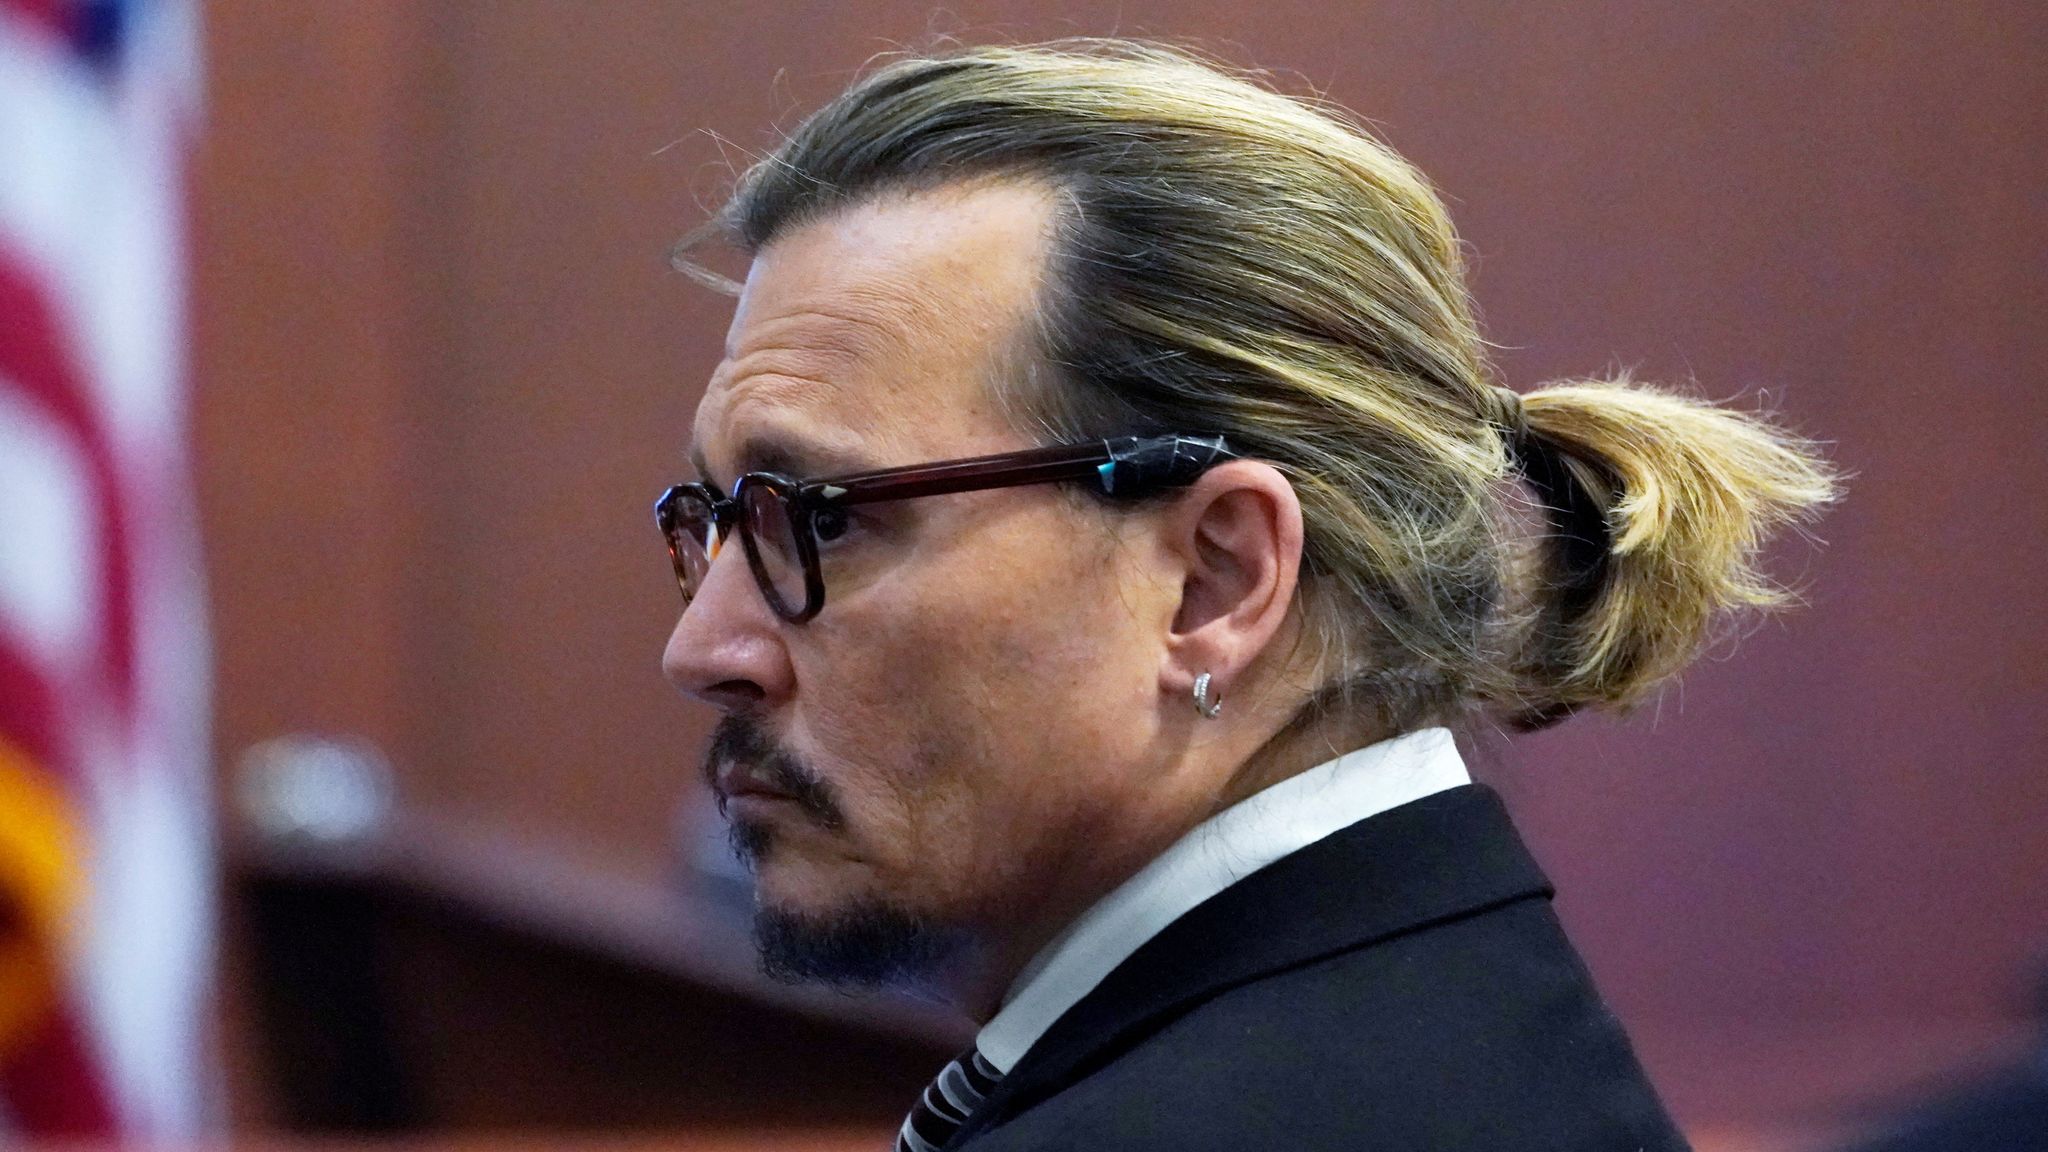 Johnny Depp v Amber Heard libel trial: Court shown photos of Depp with ...